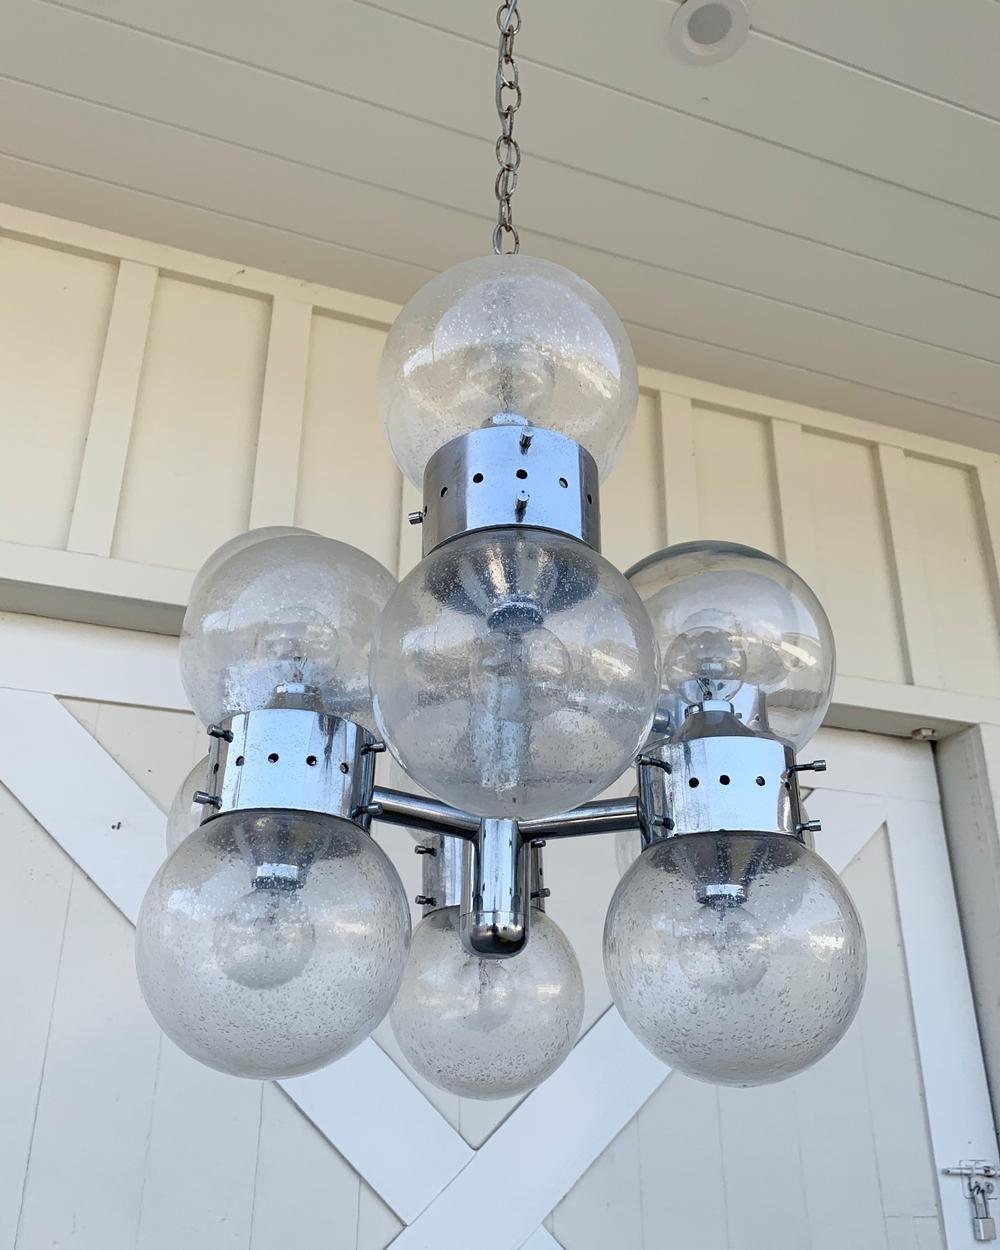 Beautiful midcentury modern chandelier with 12 globes/lights in the style of lightolier.
The murano glass style globes are mounted on a chrome frame (one of the globes has been replaced).
The piece is in vintage condition but shows